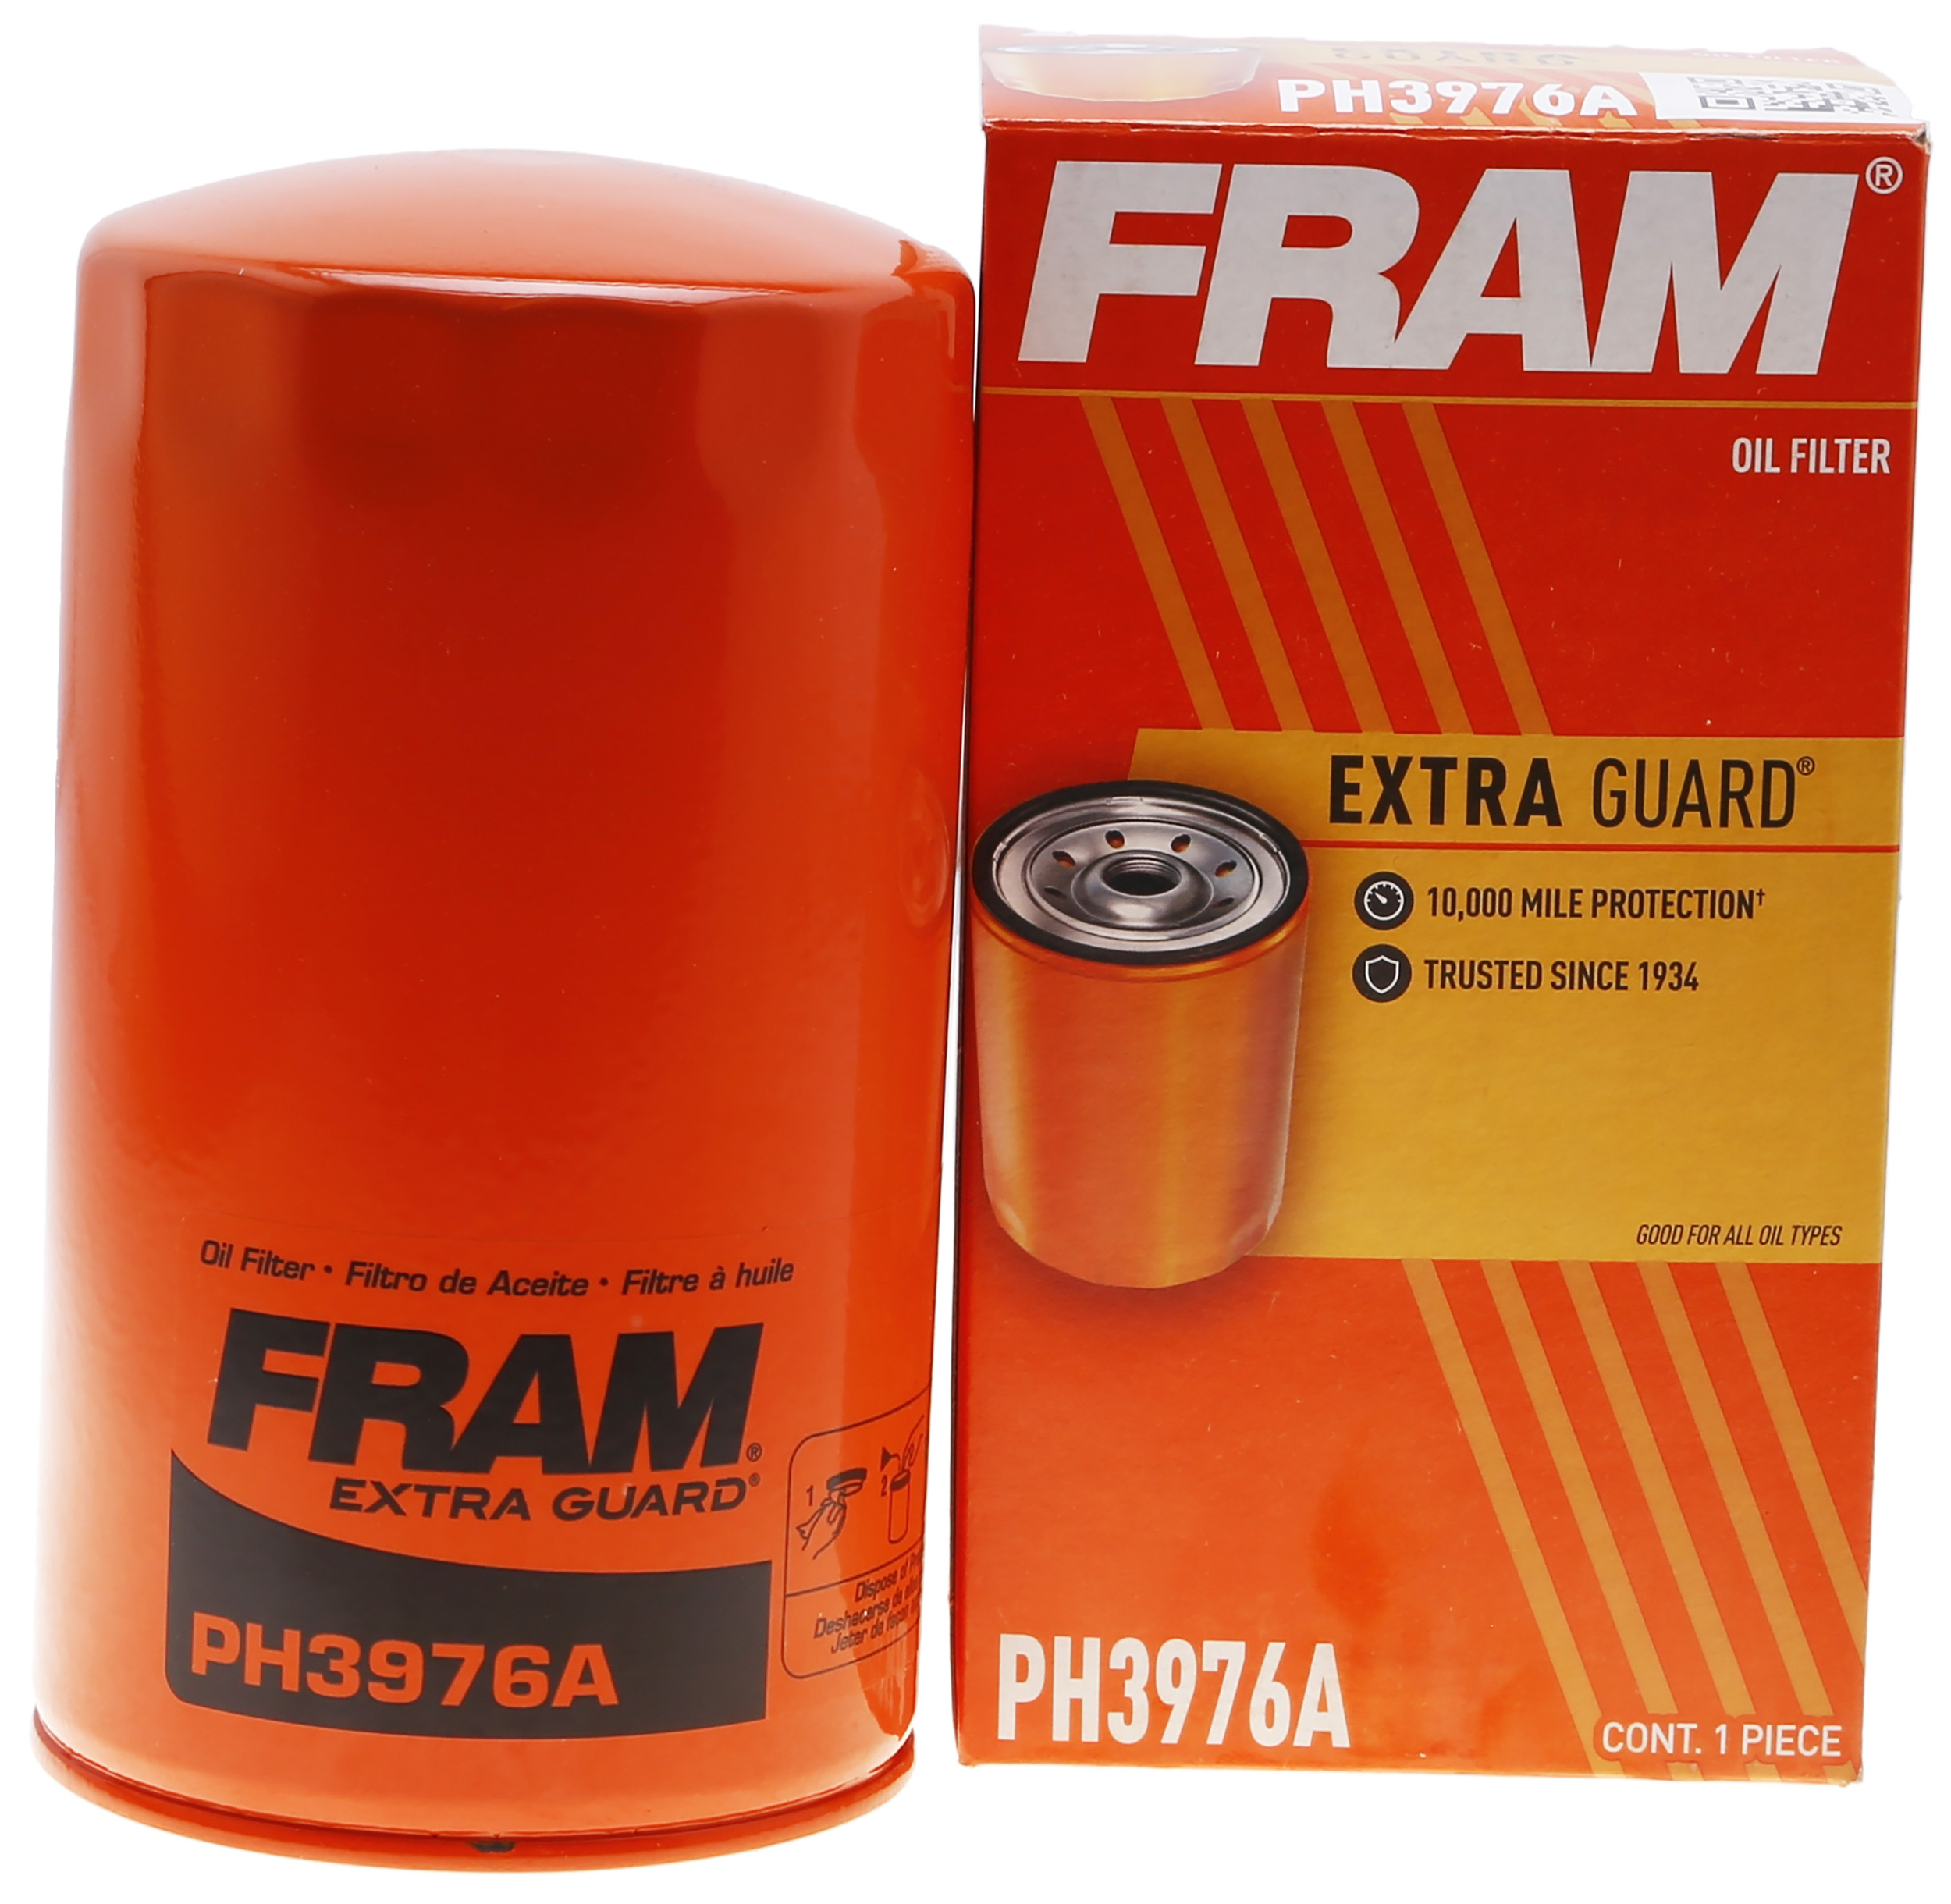 FRAM Extra Guard Oil Filter, PH3976A Fits select: 2013-2023 RAM 2500, 1994-2012 DODGE RAM 2500 - image 1 of 9